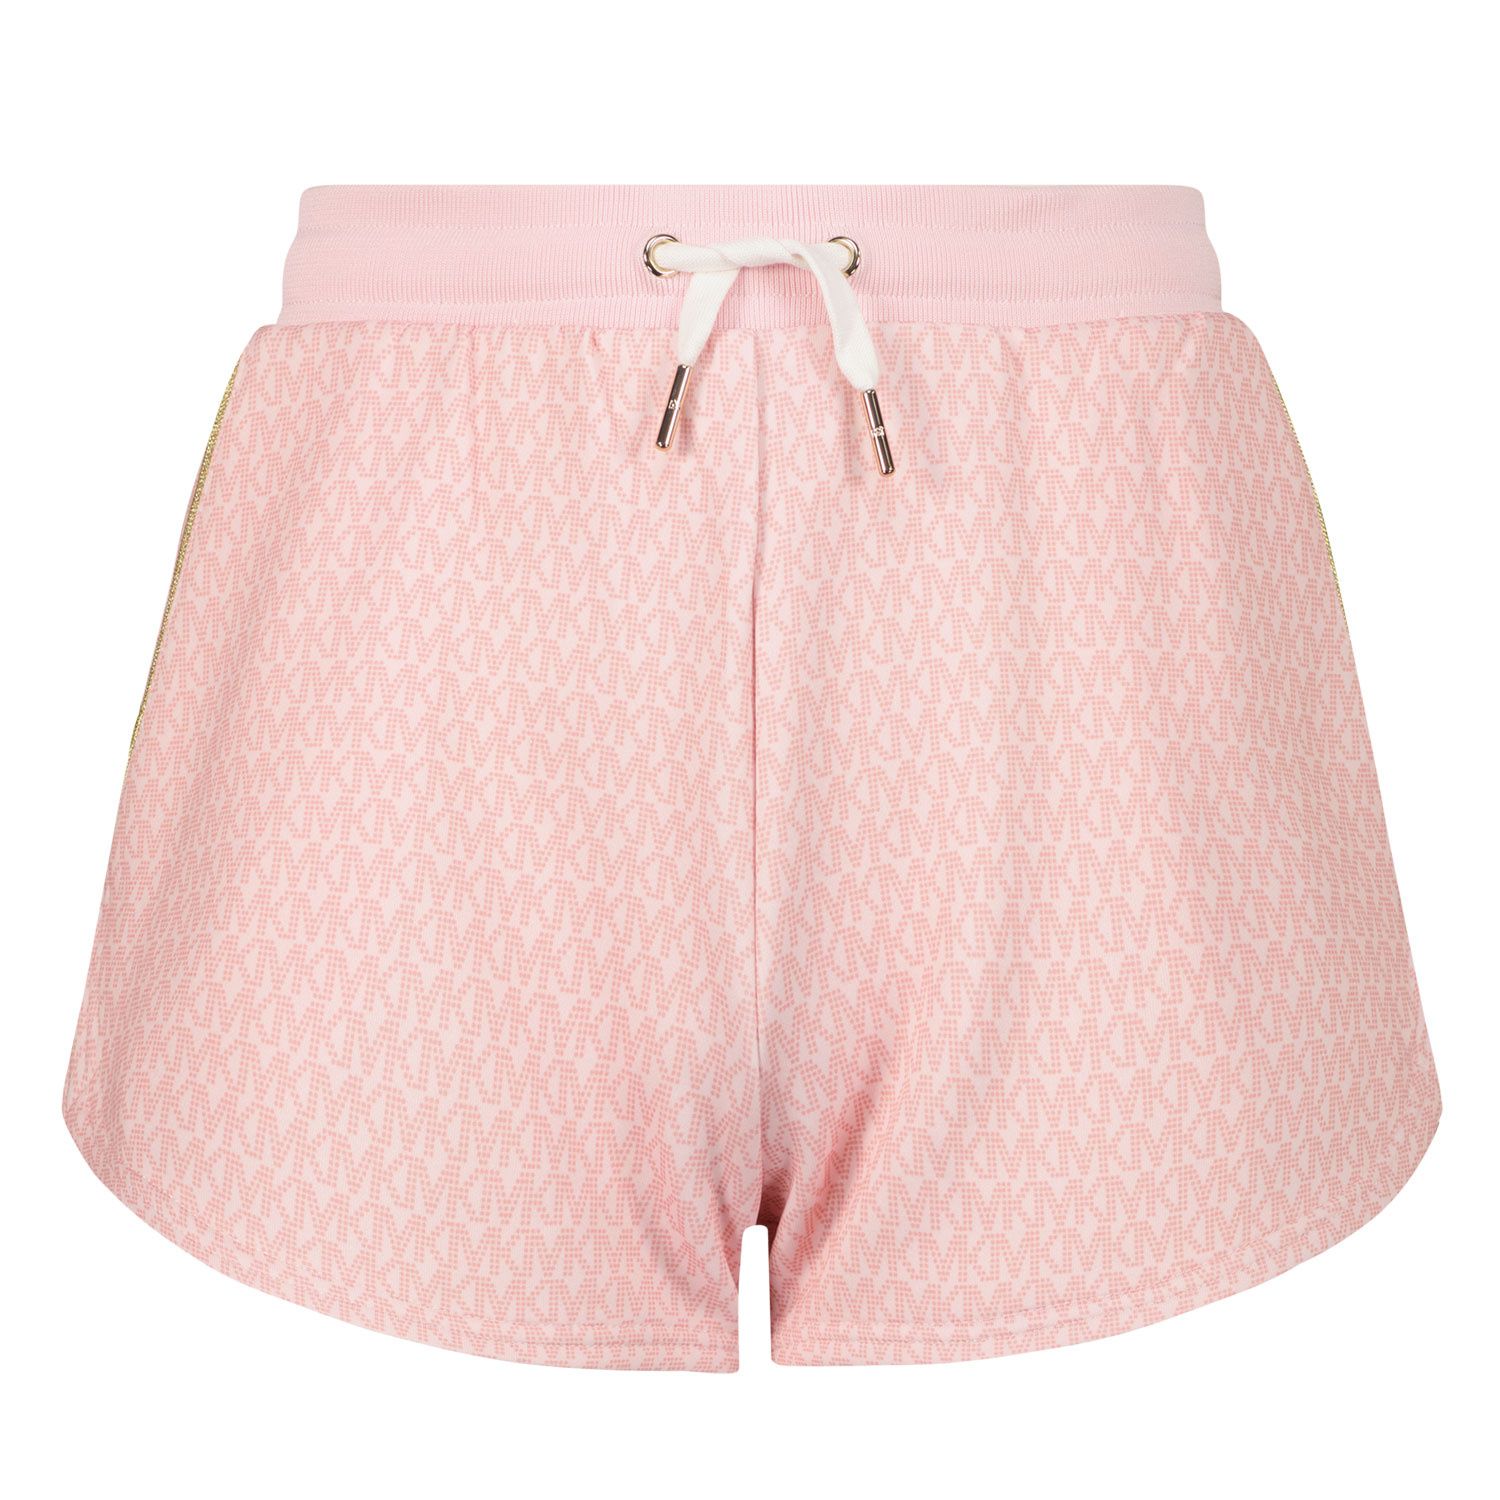 Picture of Michael Kors R14108 kids shorts light pink